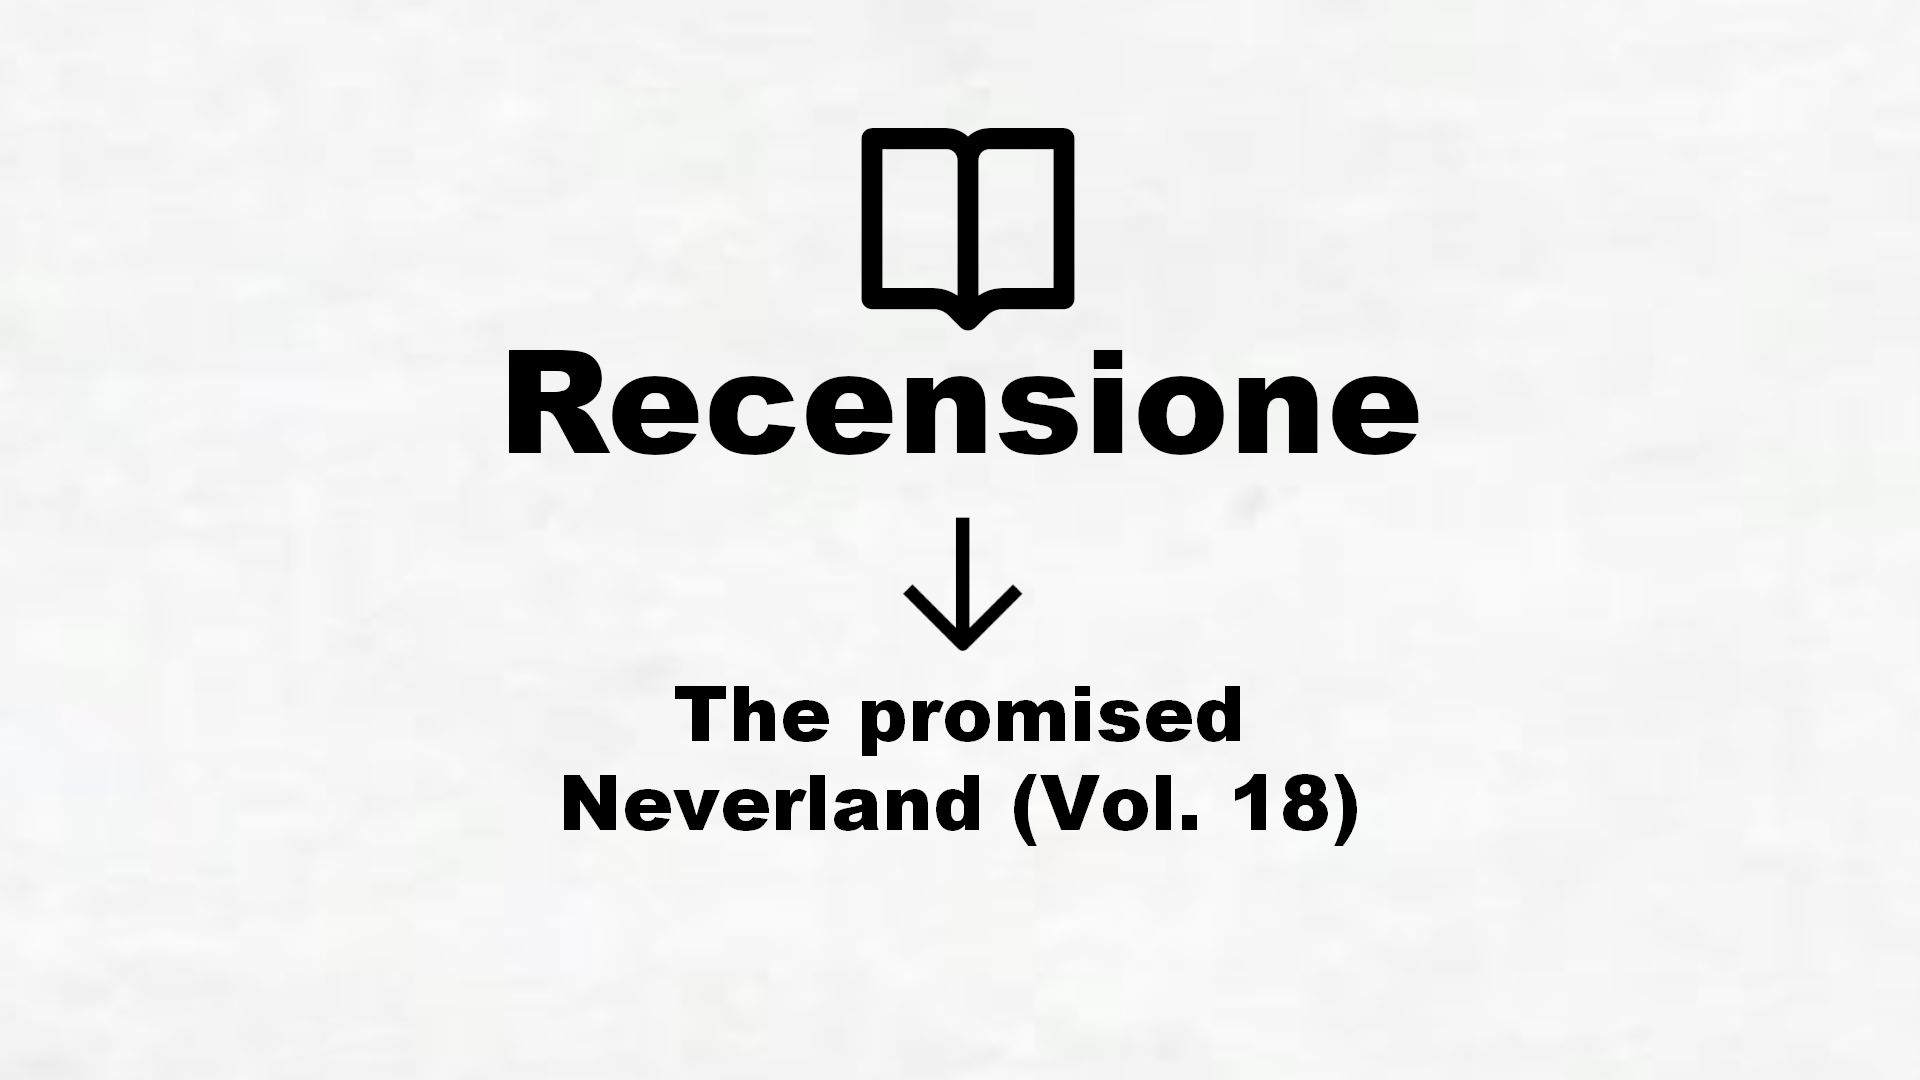 The promised Neverland (Vol. 18) – Recensione Libro